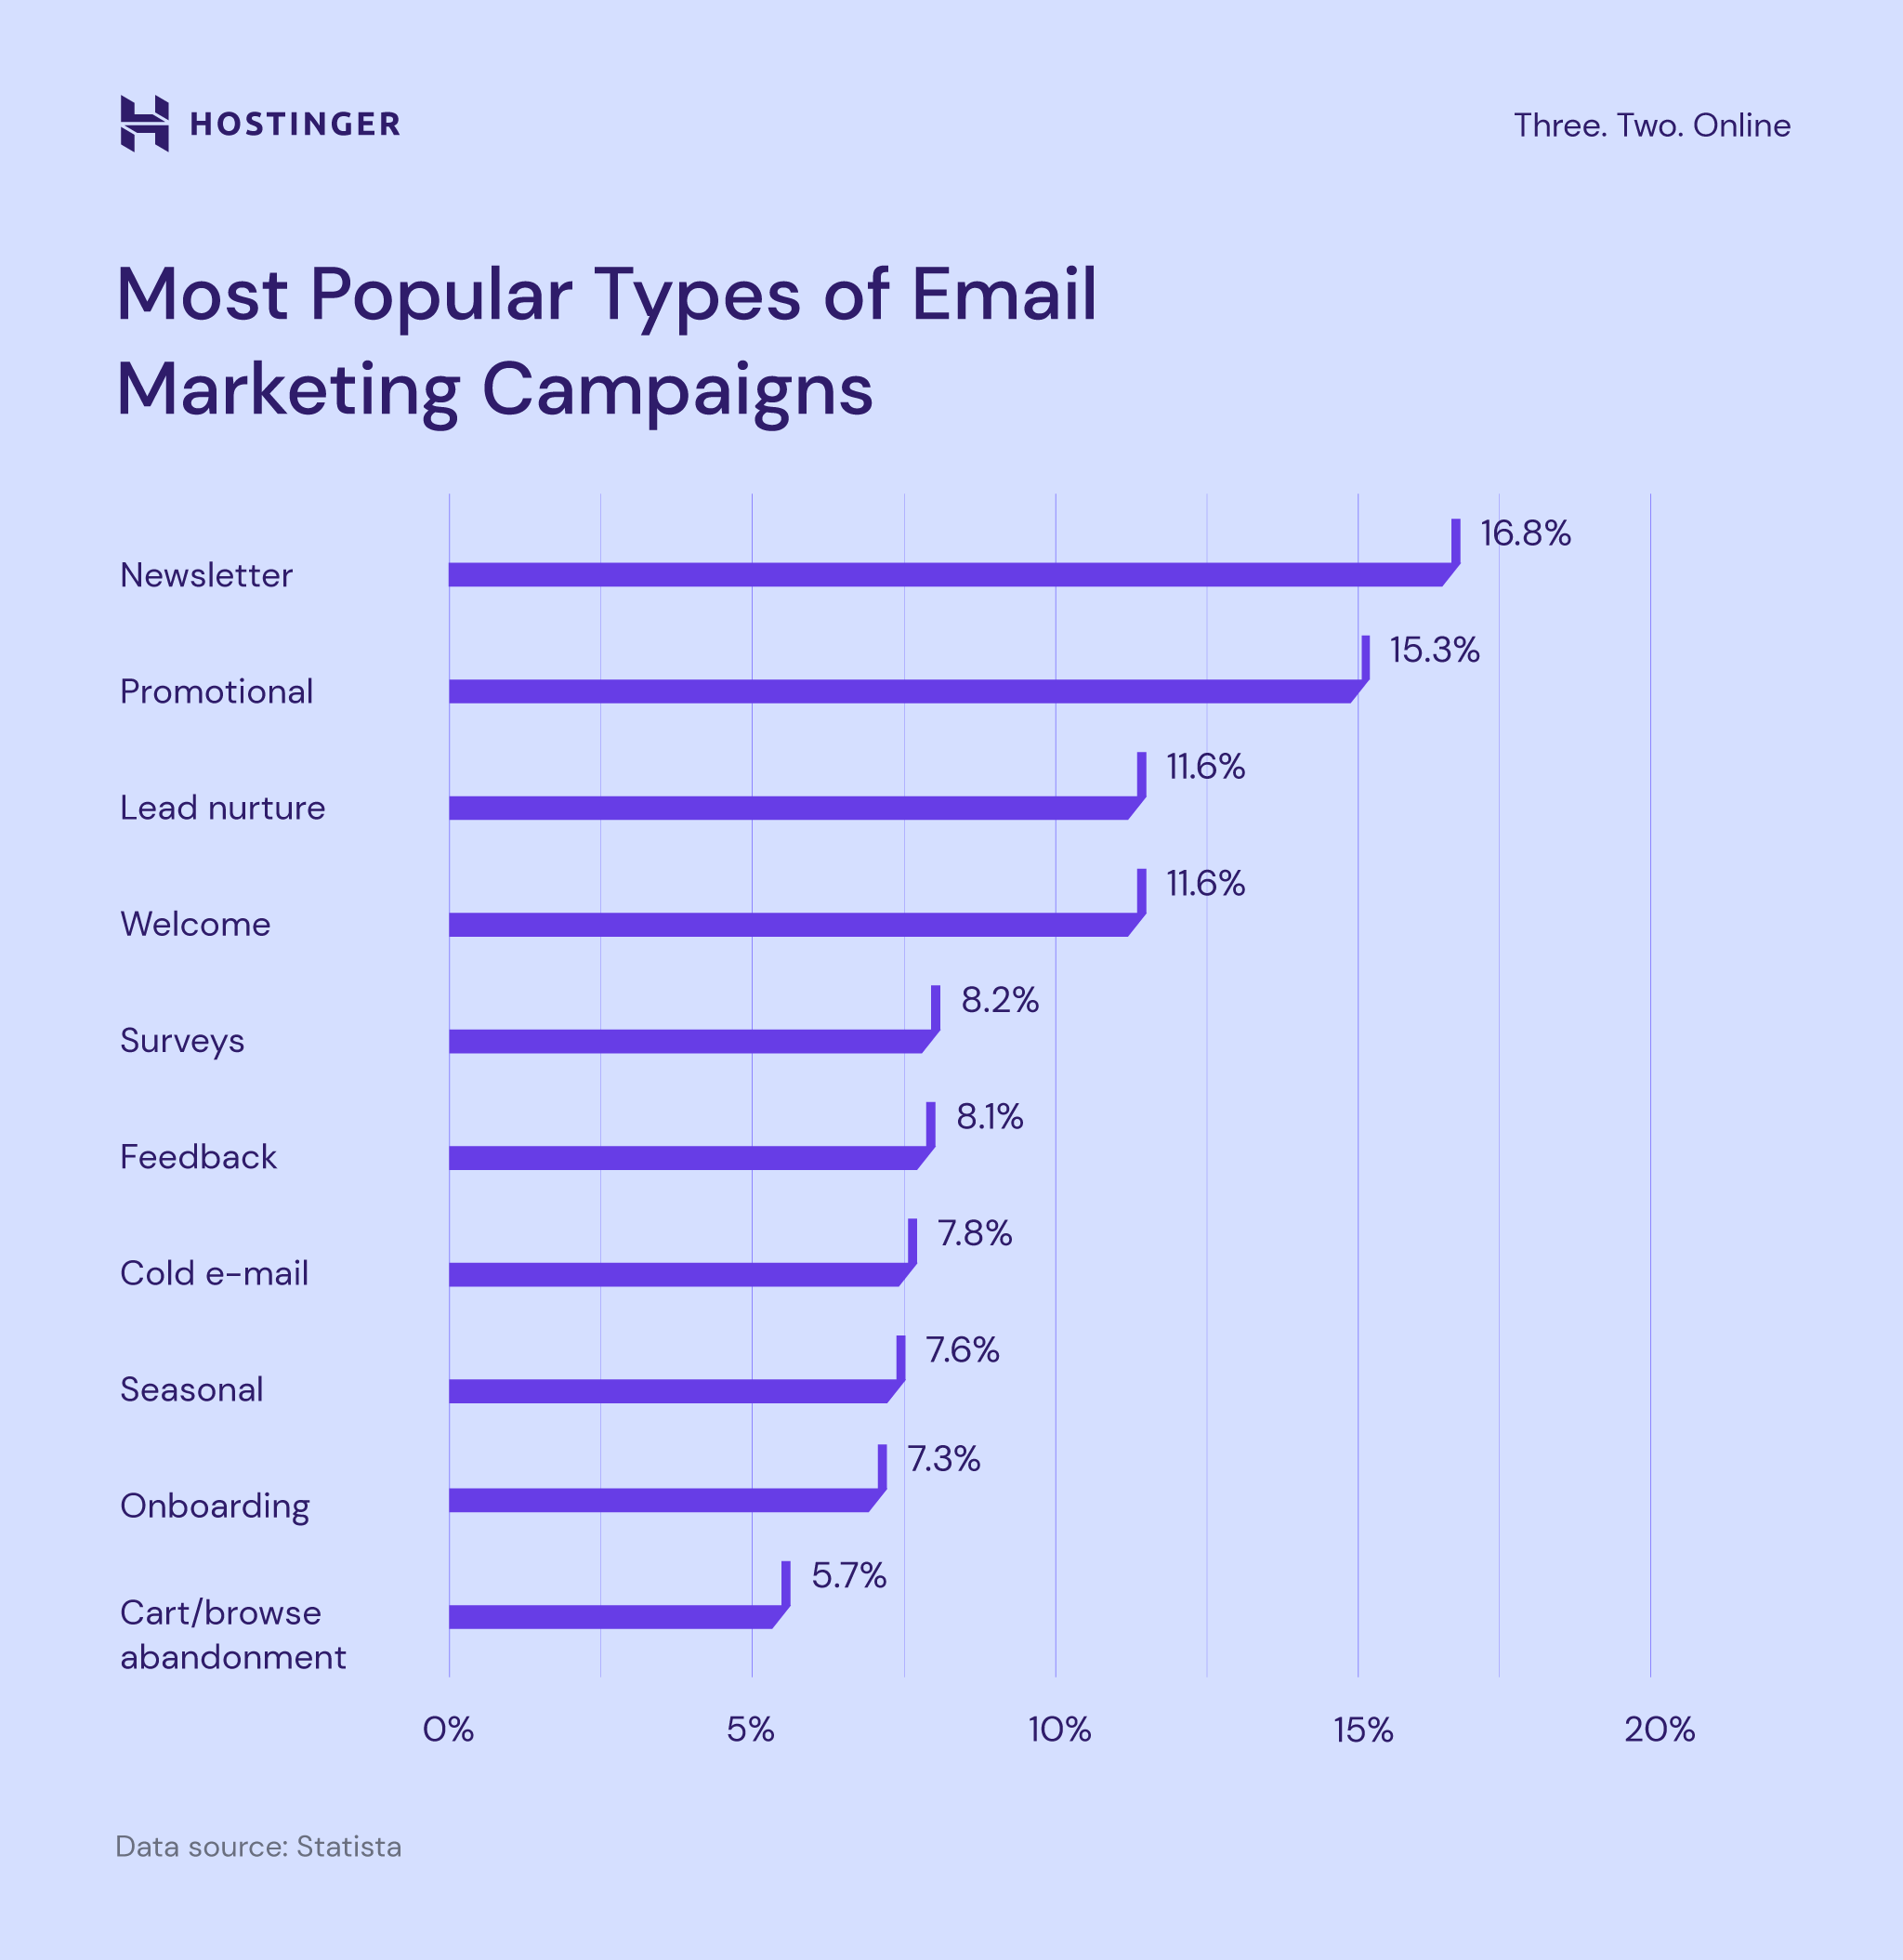 The most popular types of email marketing campaigns
